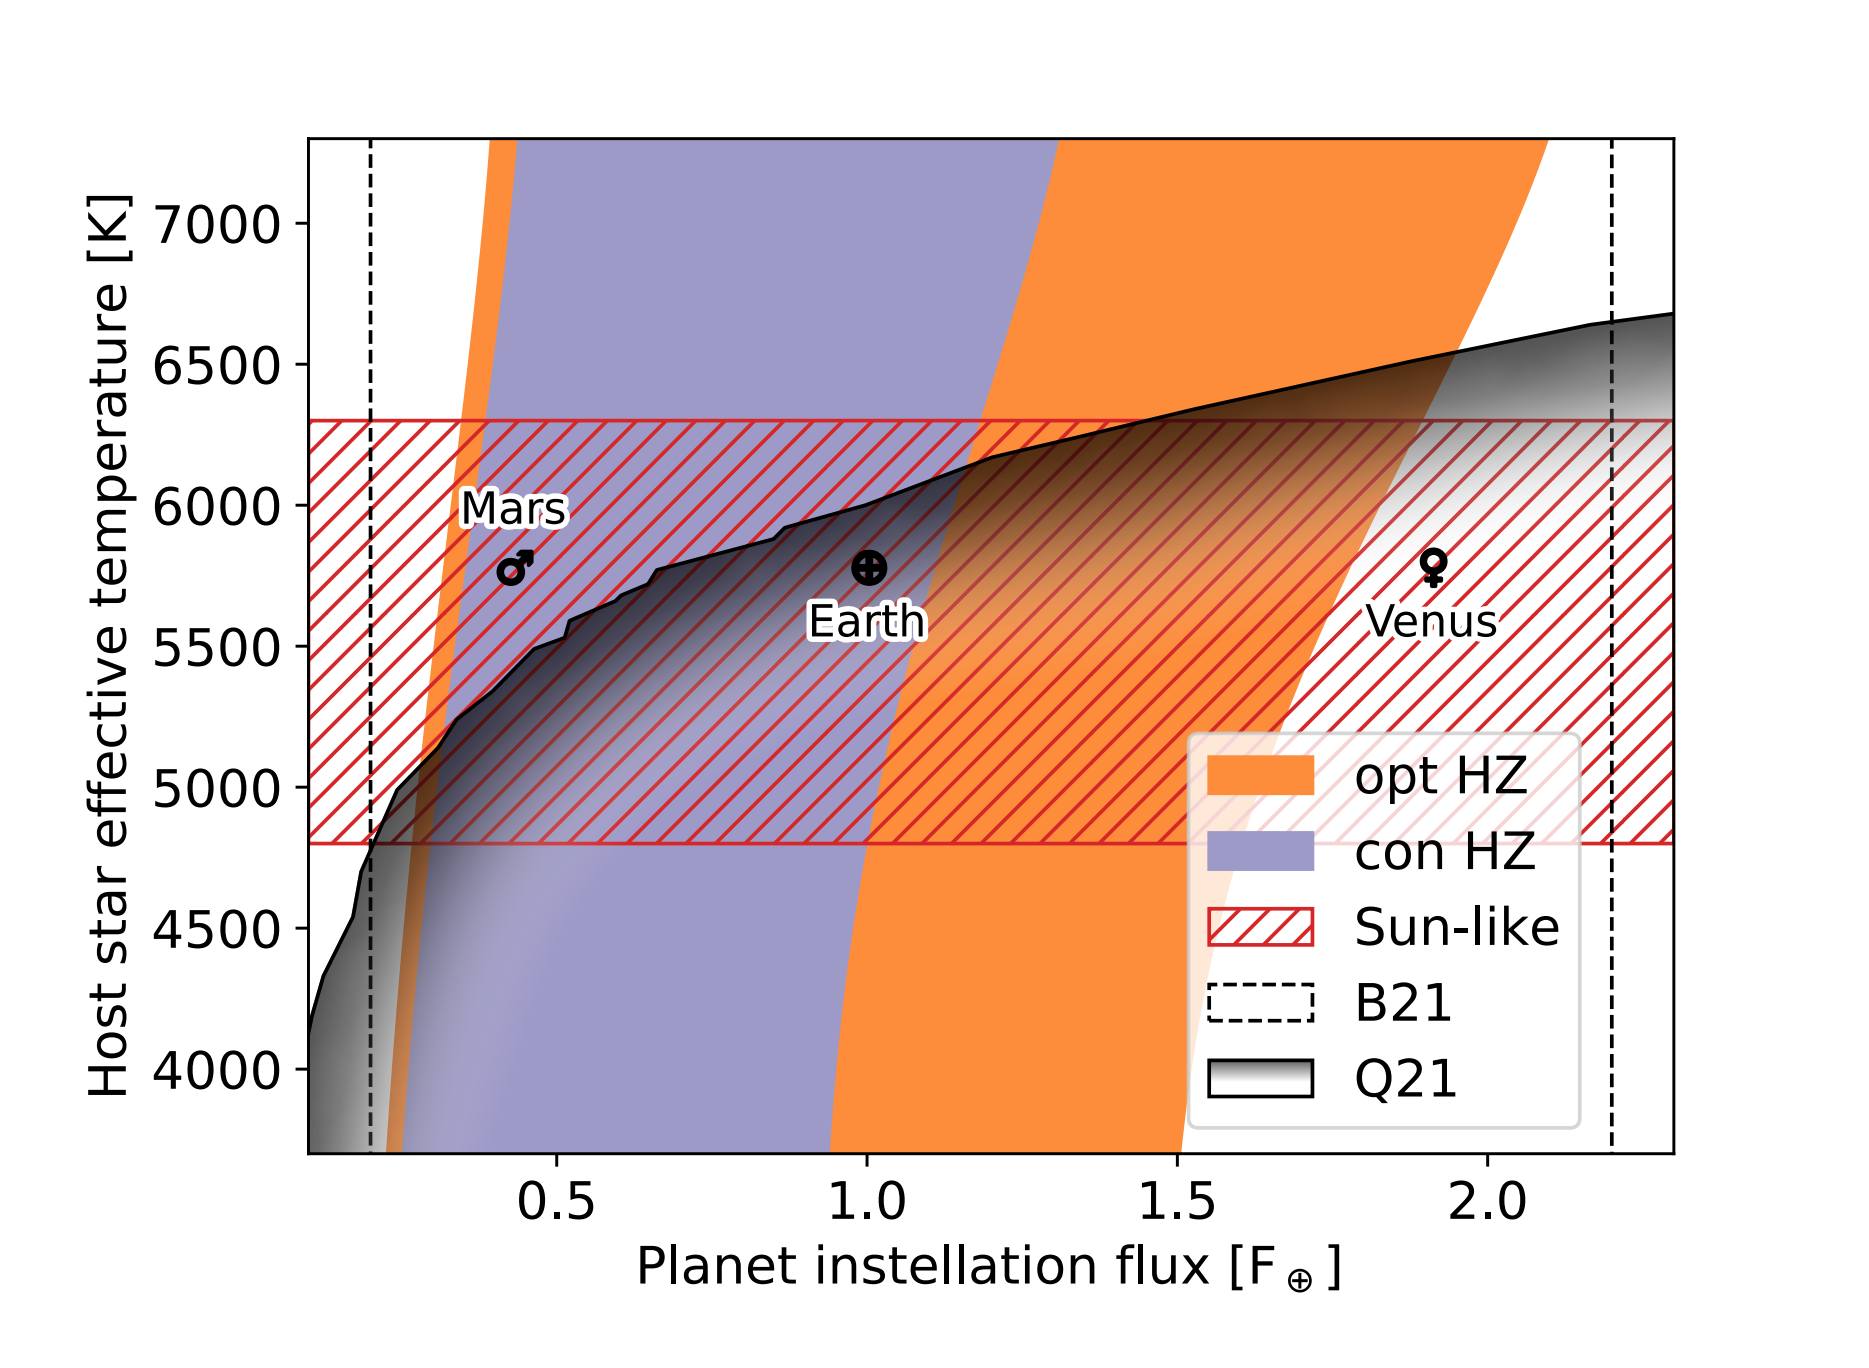 Large Interferometer For Exoplanets (LIFE): VIII. Detecting Rocky Exoplanets In The Habitable Zones Of Sun-like Stars